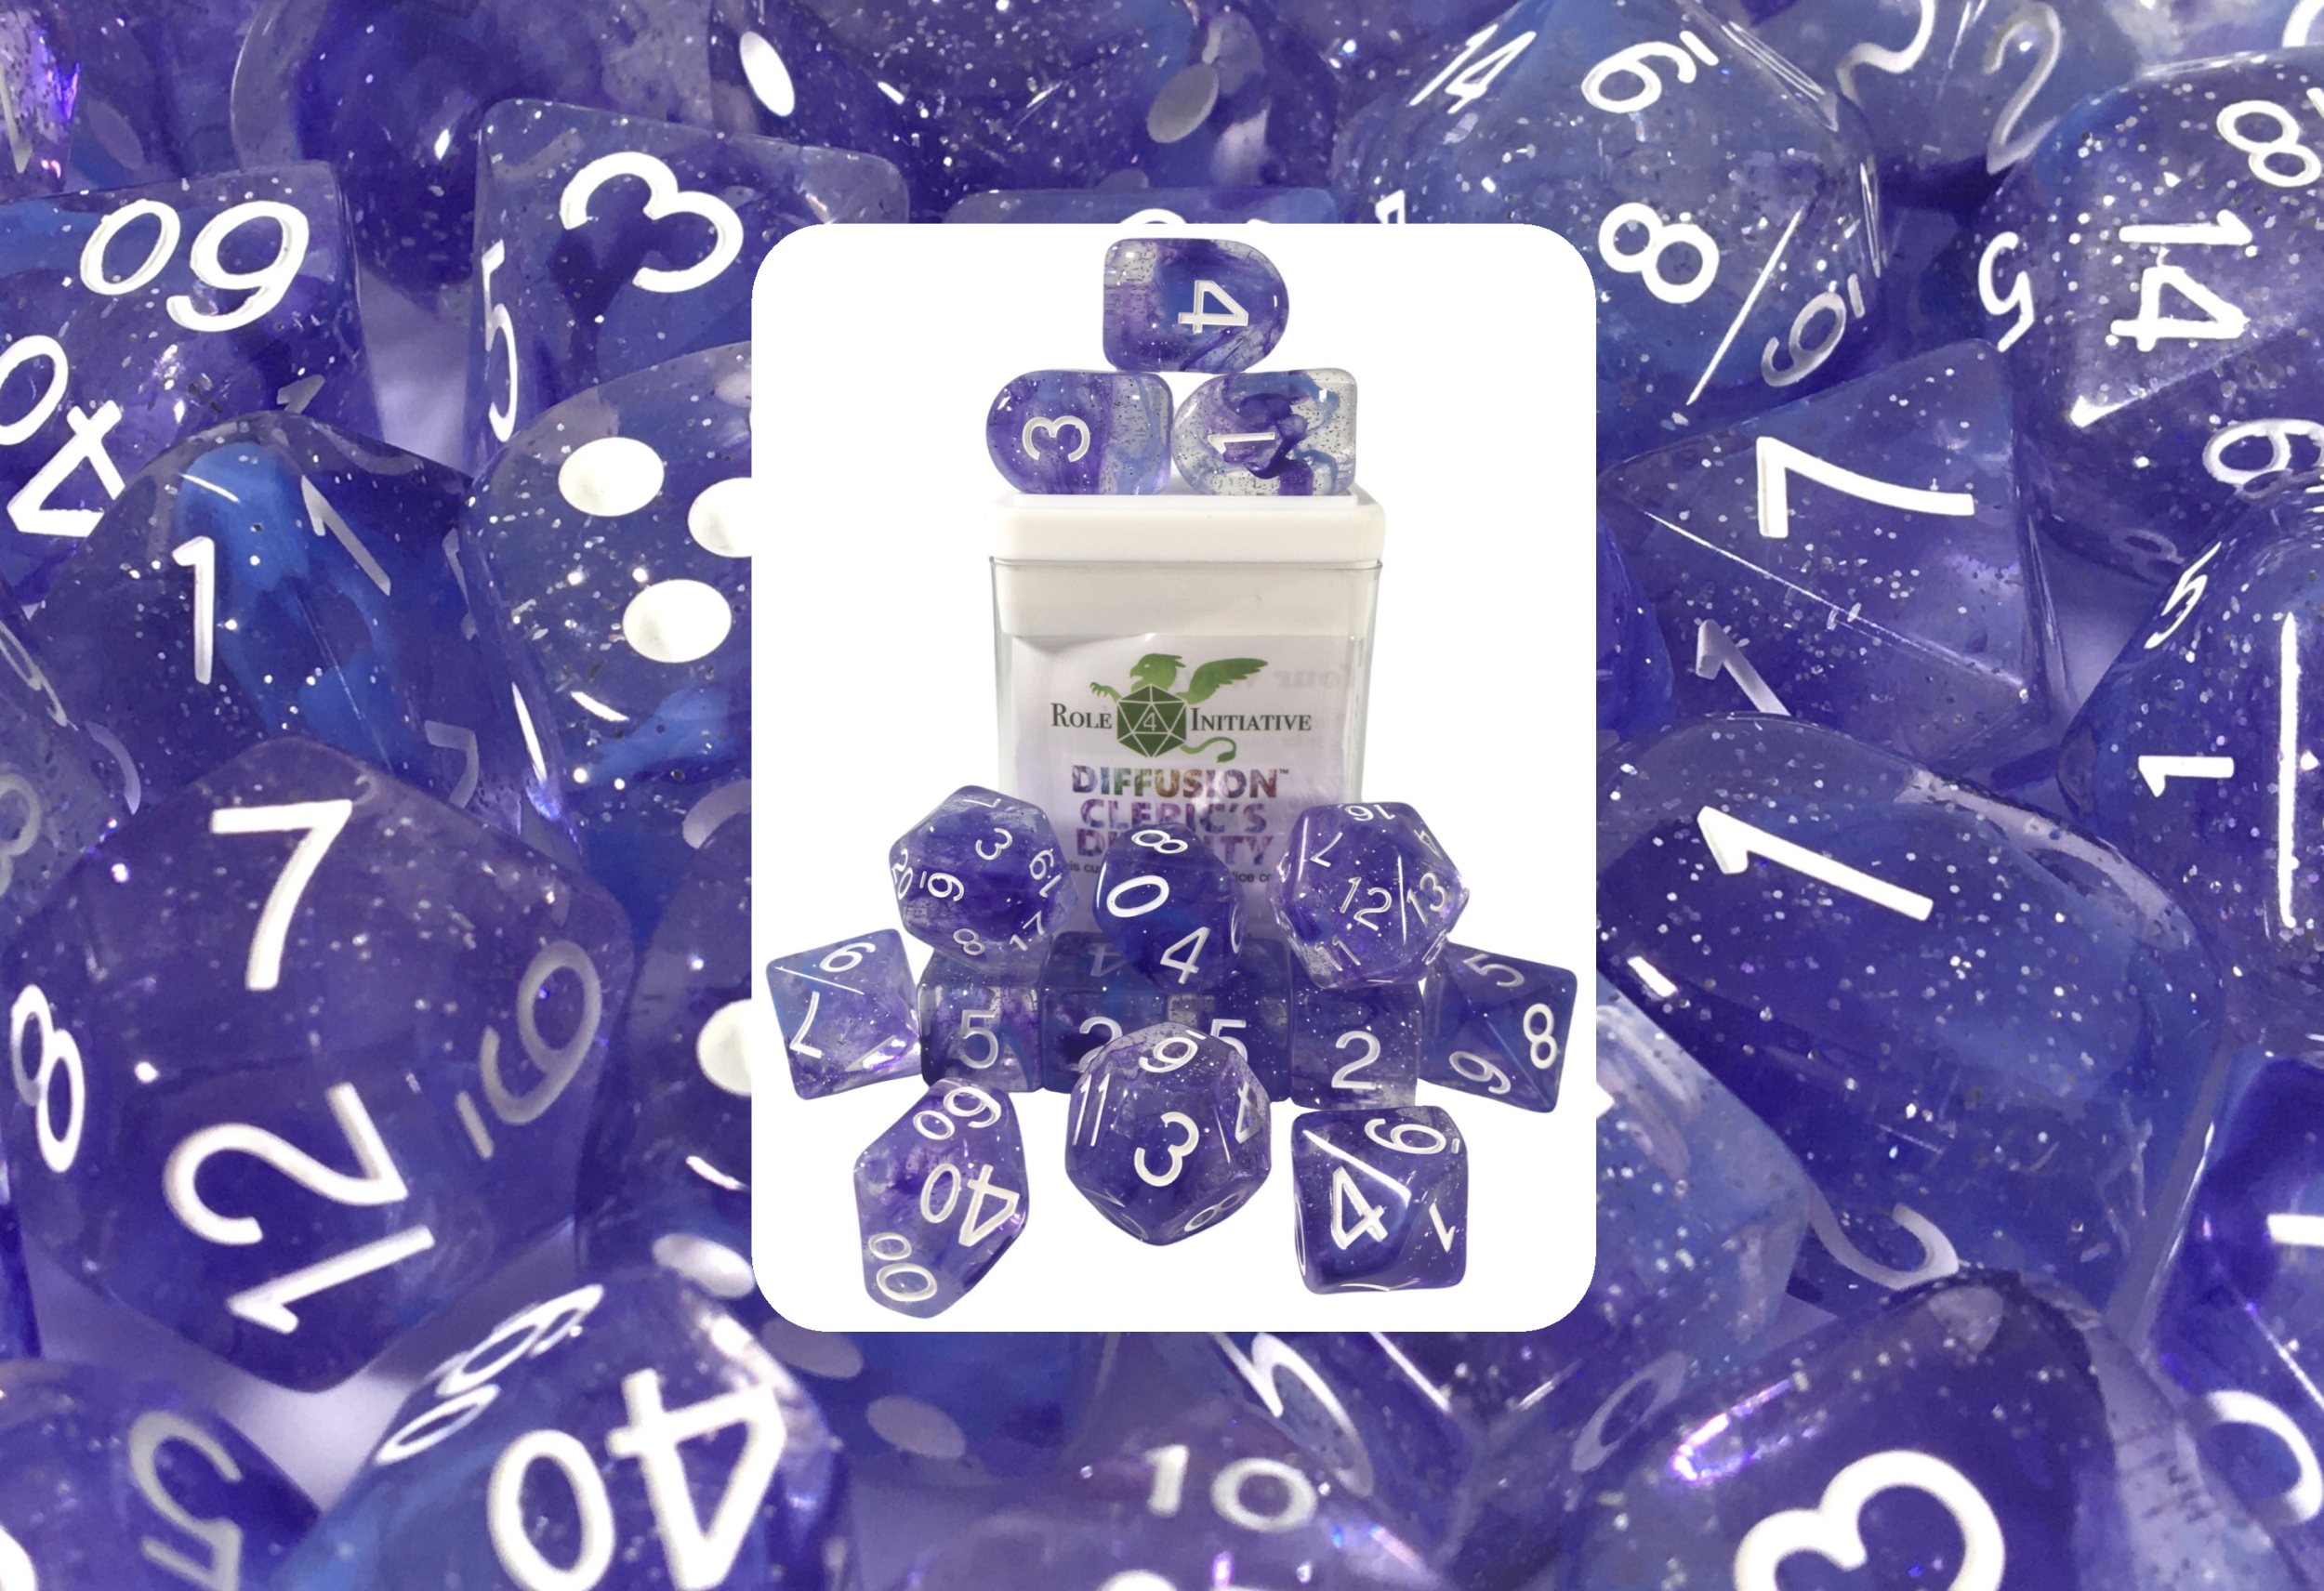 Role 4 Initiative: Polyhedral 15 Dice Set: Diffusion Clerics Divinity [Arch/ Balanced]  